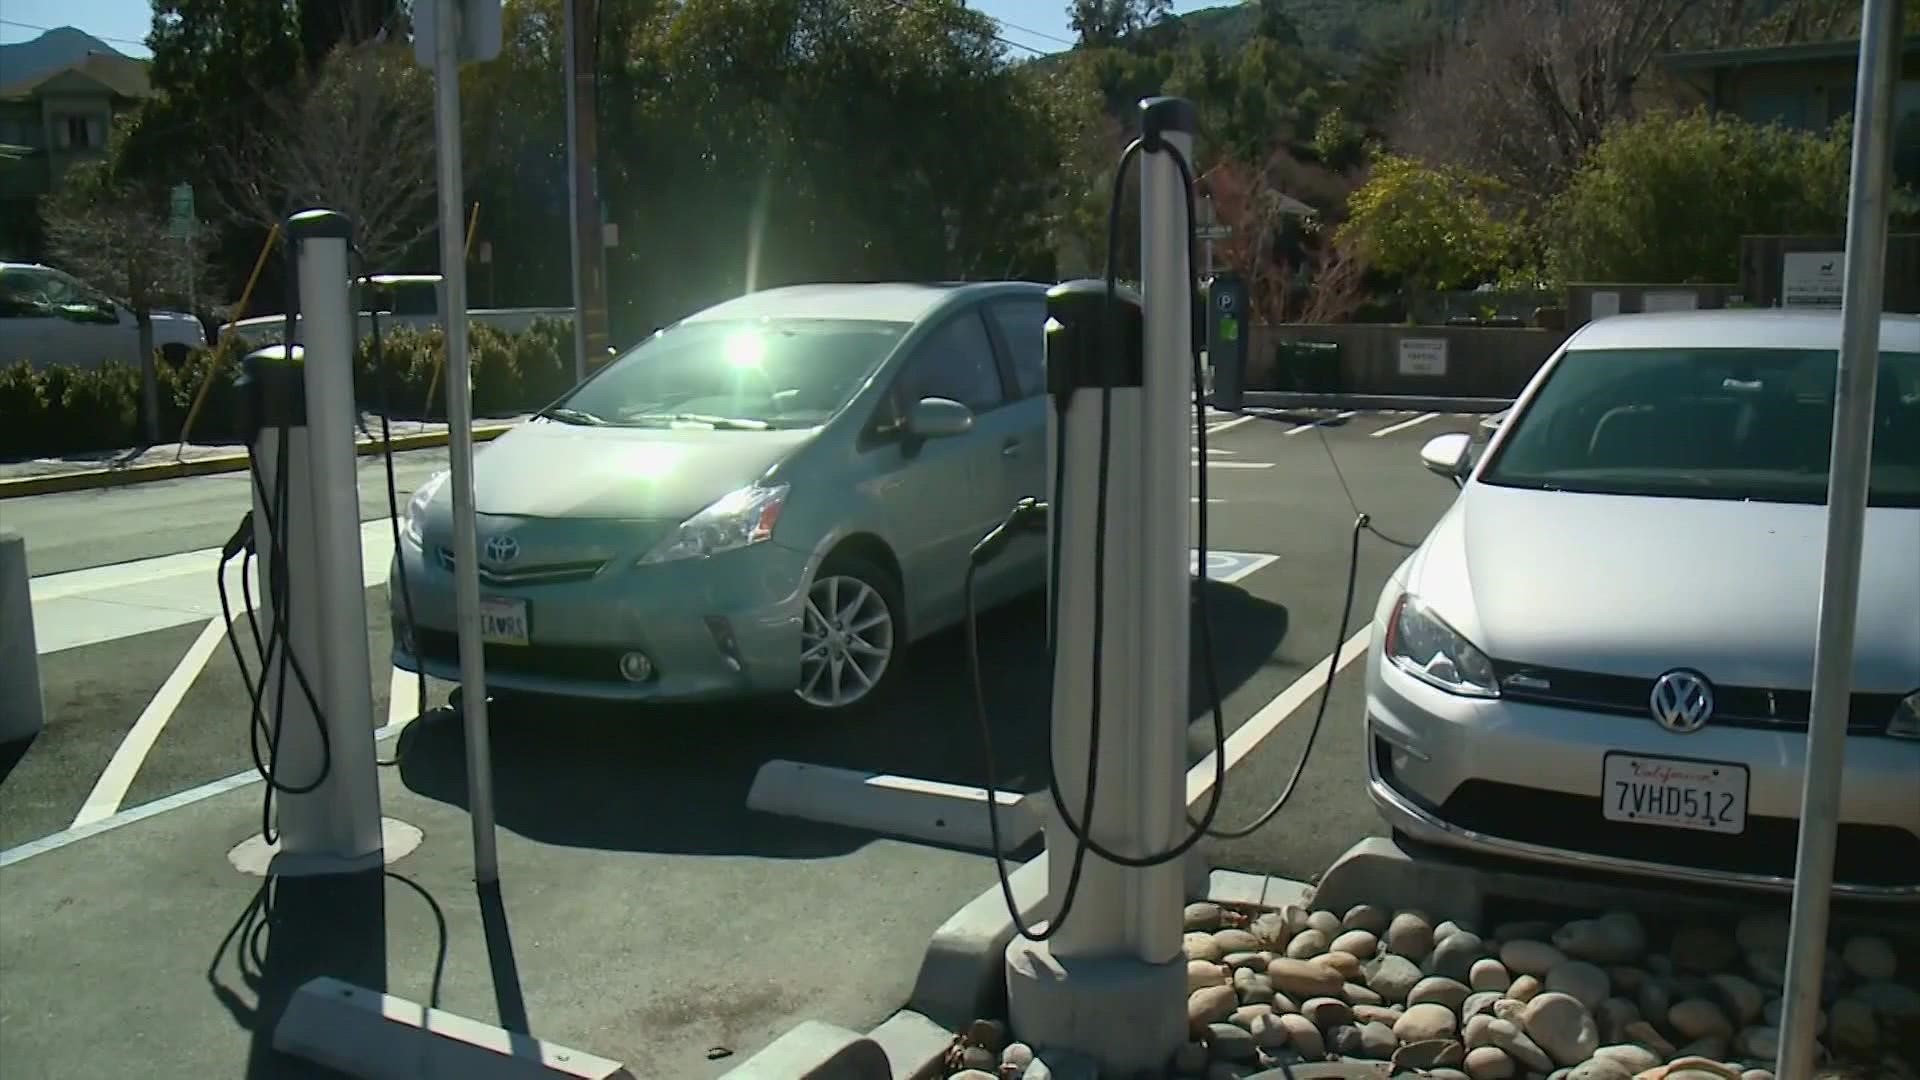 Under a new federal law, you could earn up to a $7500 tax credit for buying a plug-in hybrid or electric vehicle.